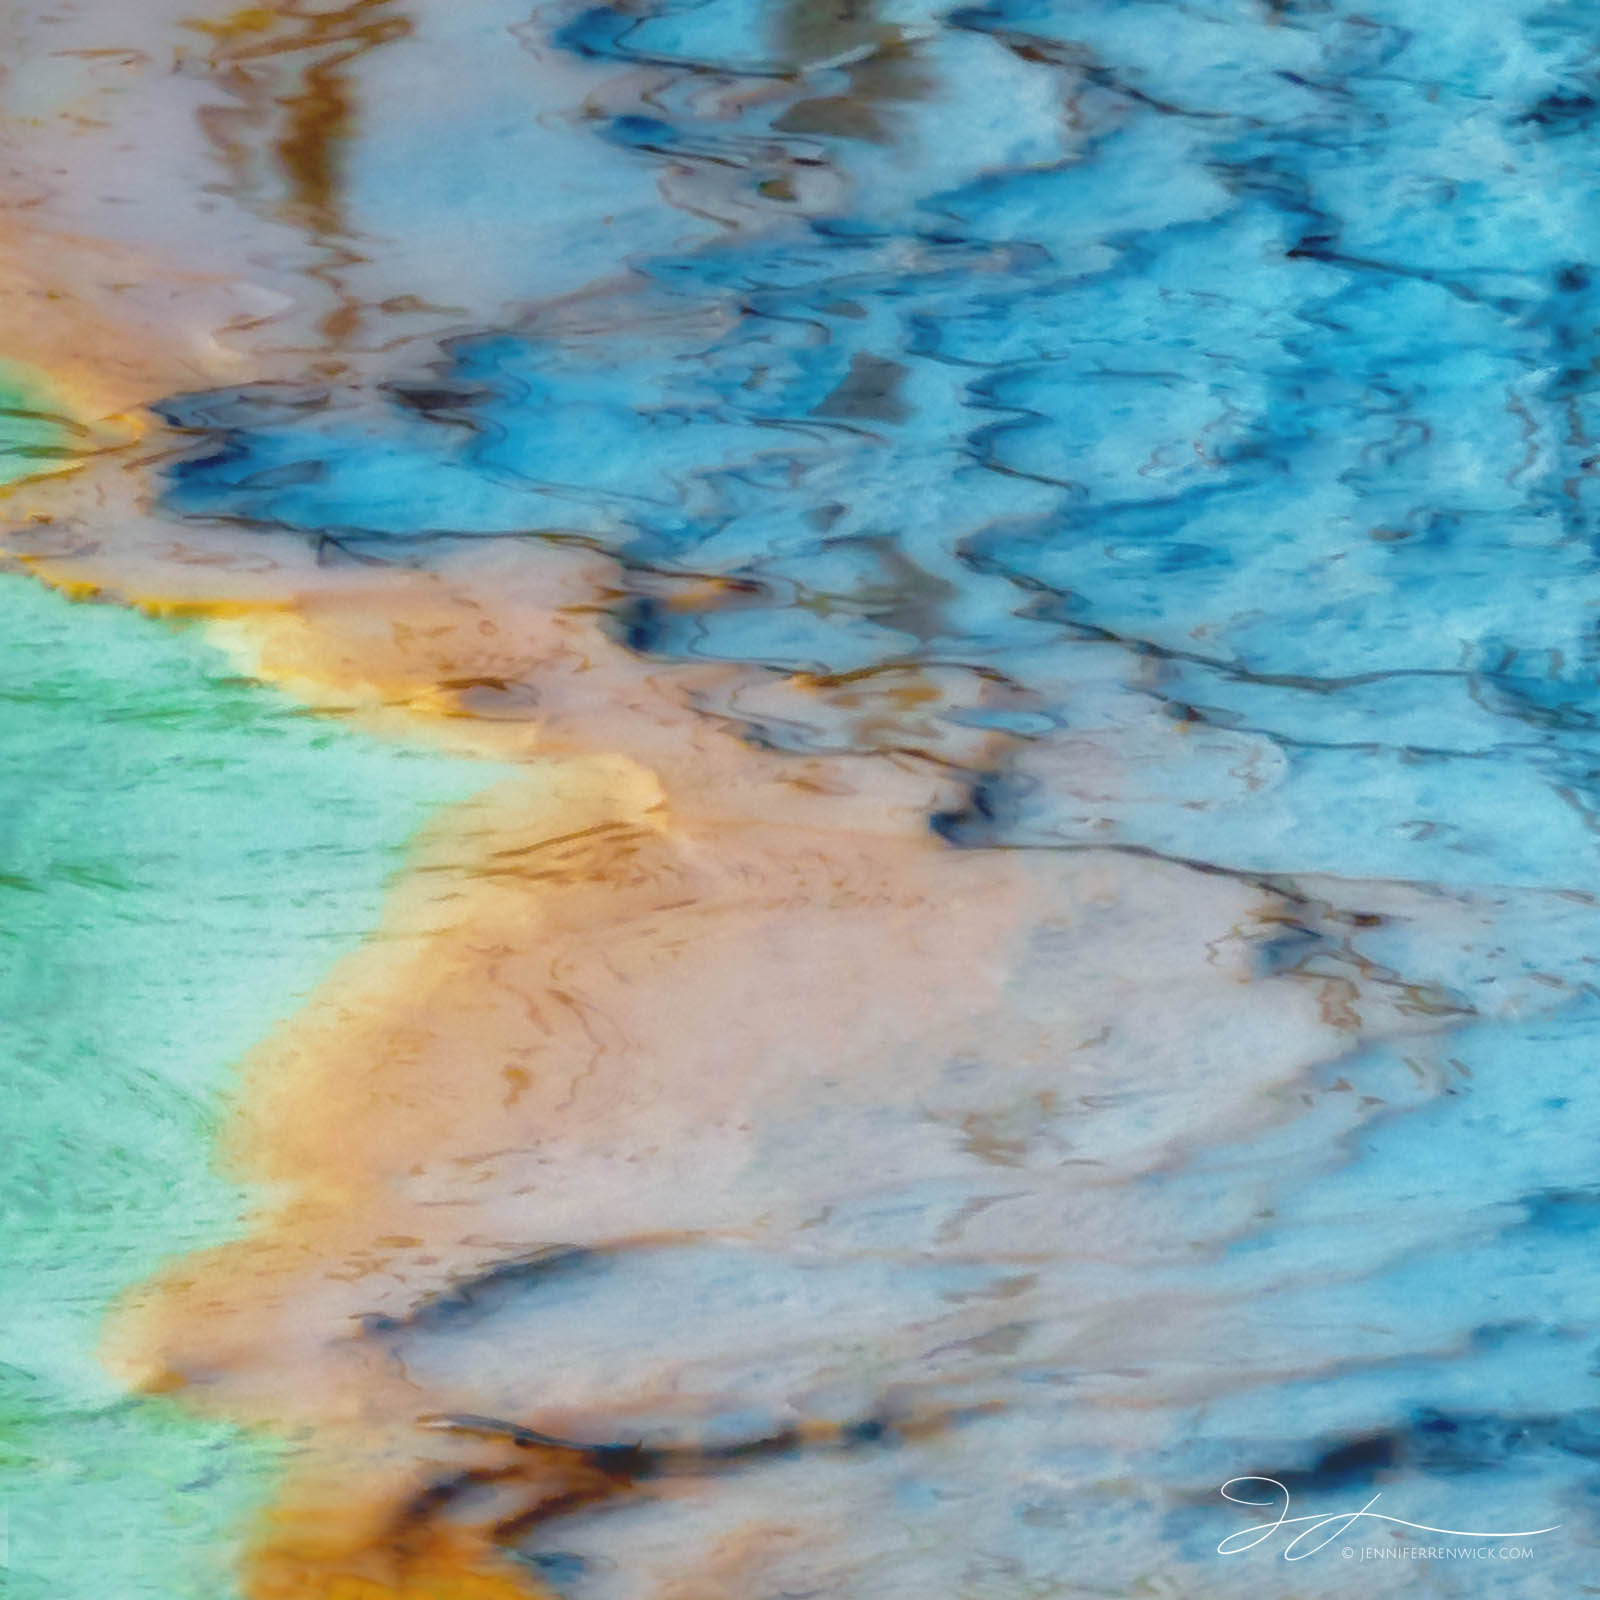 A mix of colors from thermophilic bacteria creates a colorful pattern in a hot spring.